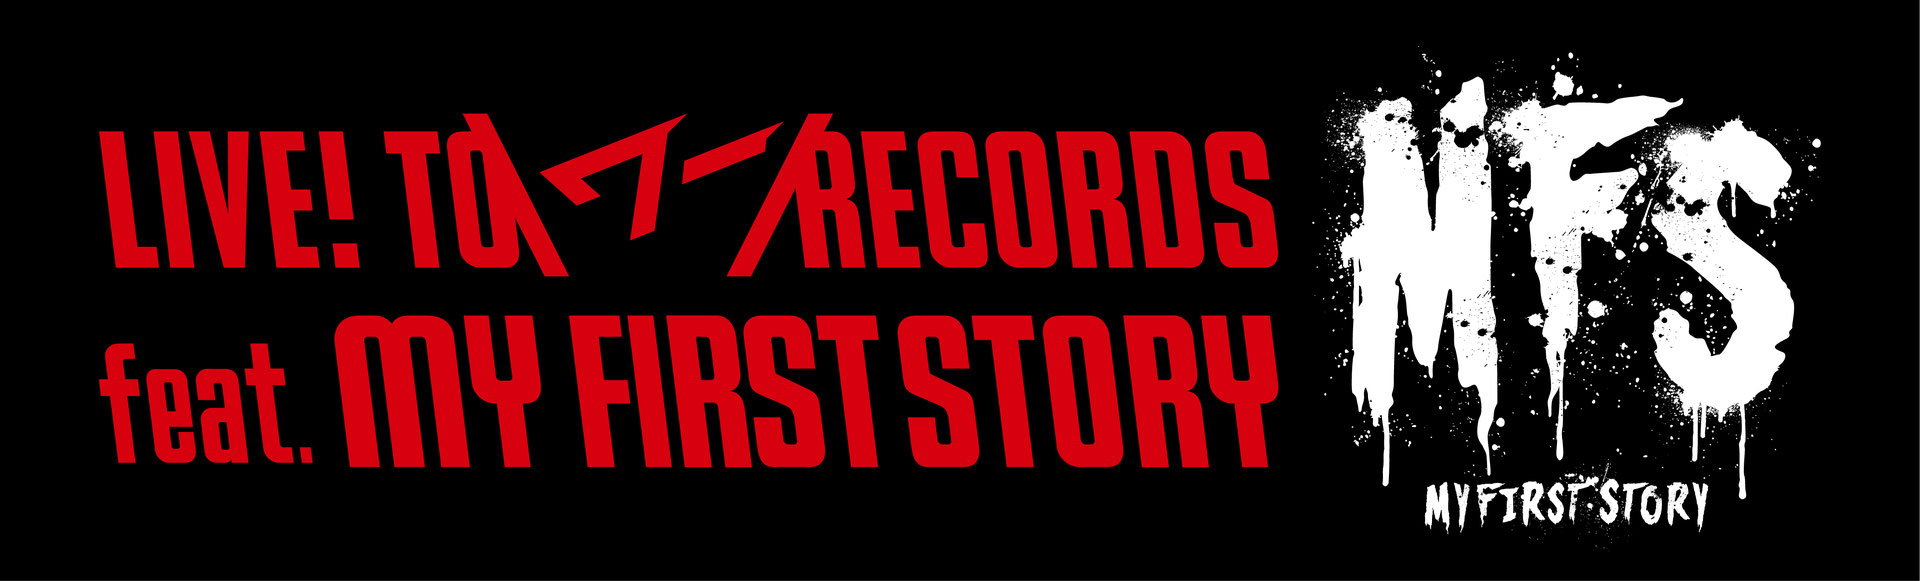 Live To ワー Records Feat My First Story